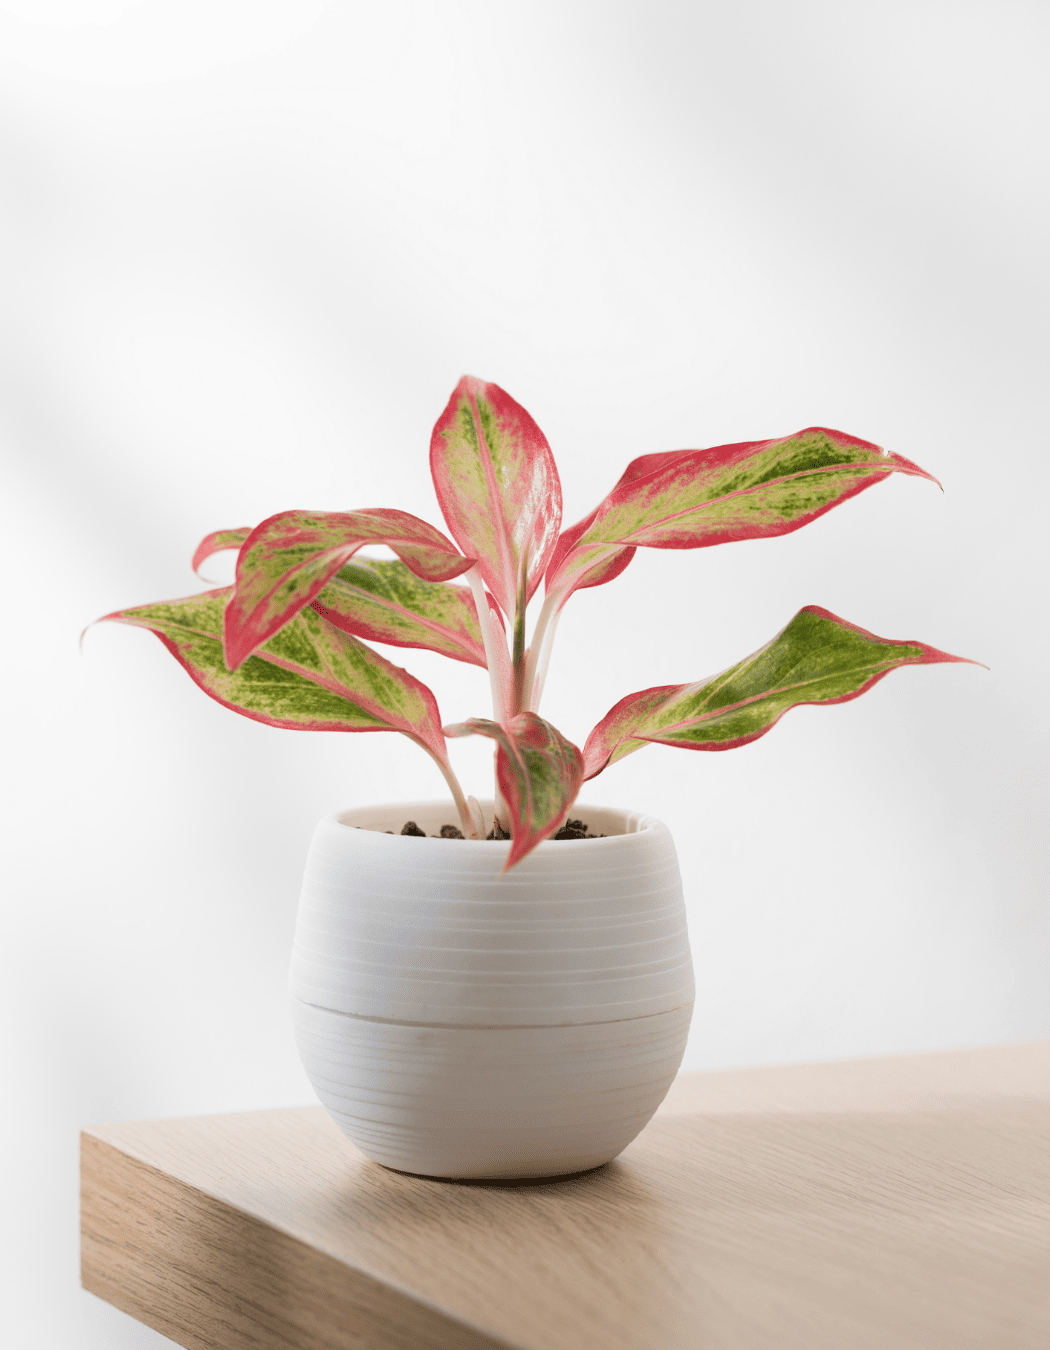 Hard-to-kill indoor plant featuring potted Chinese evergreen